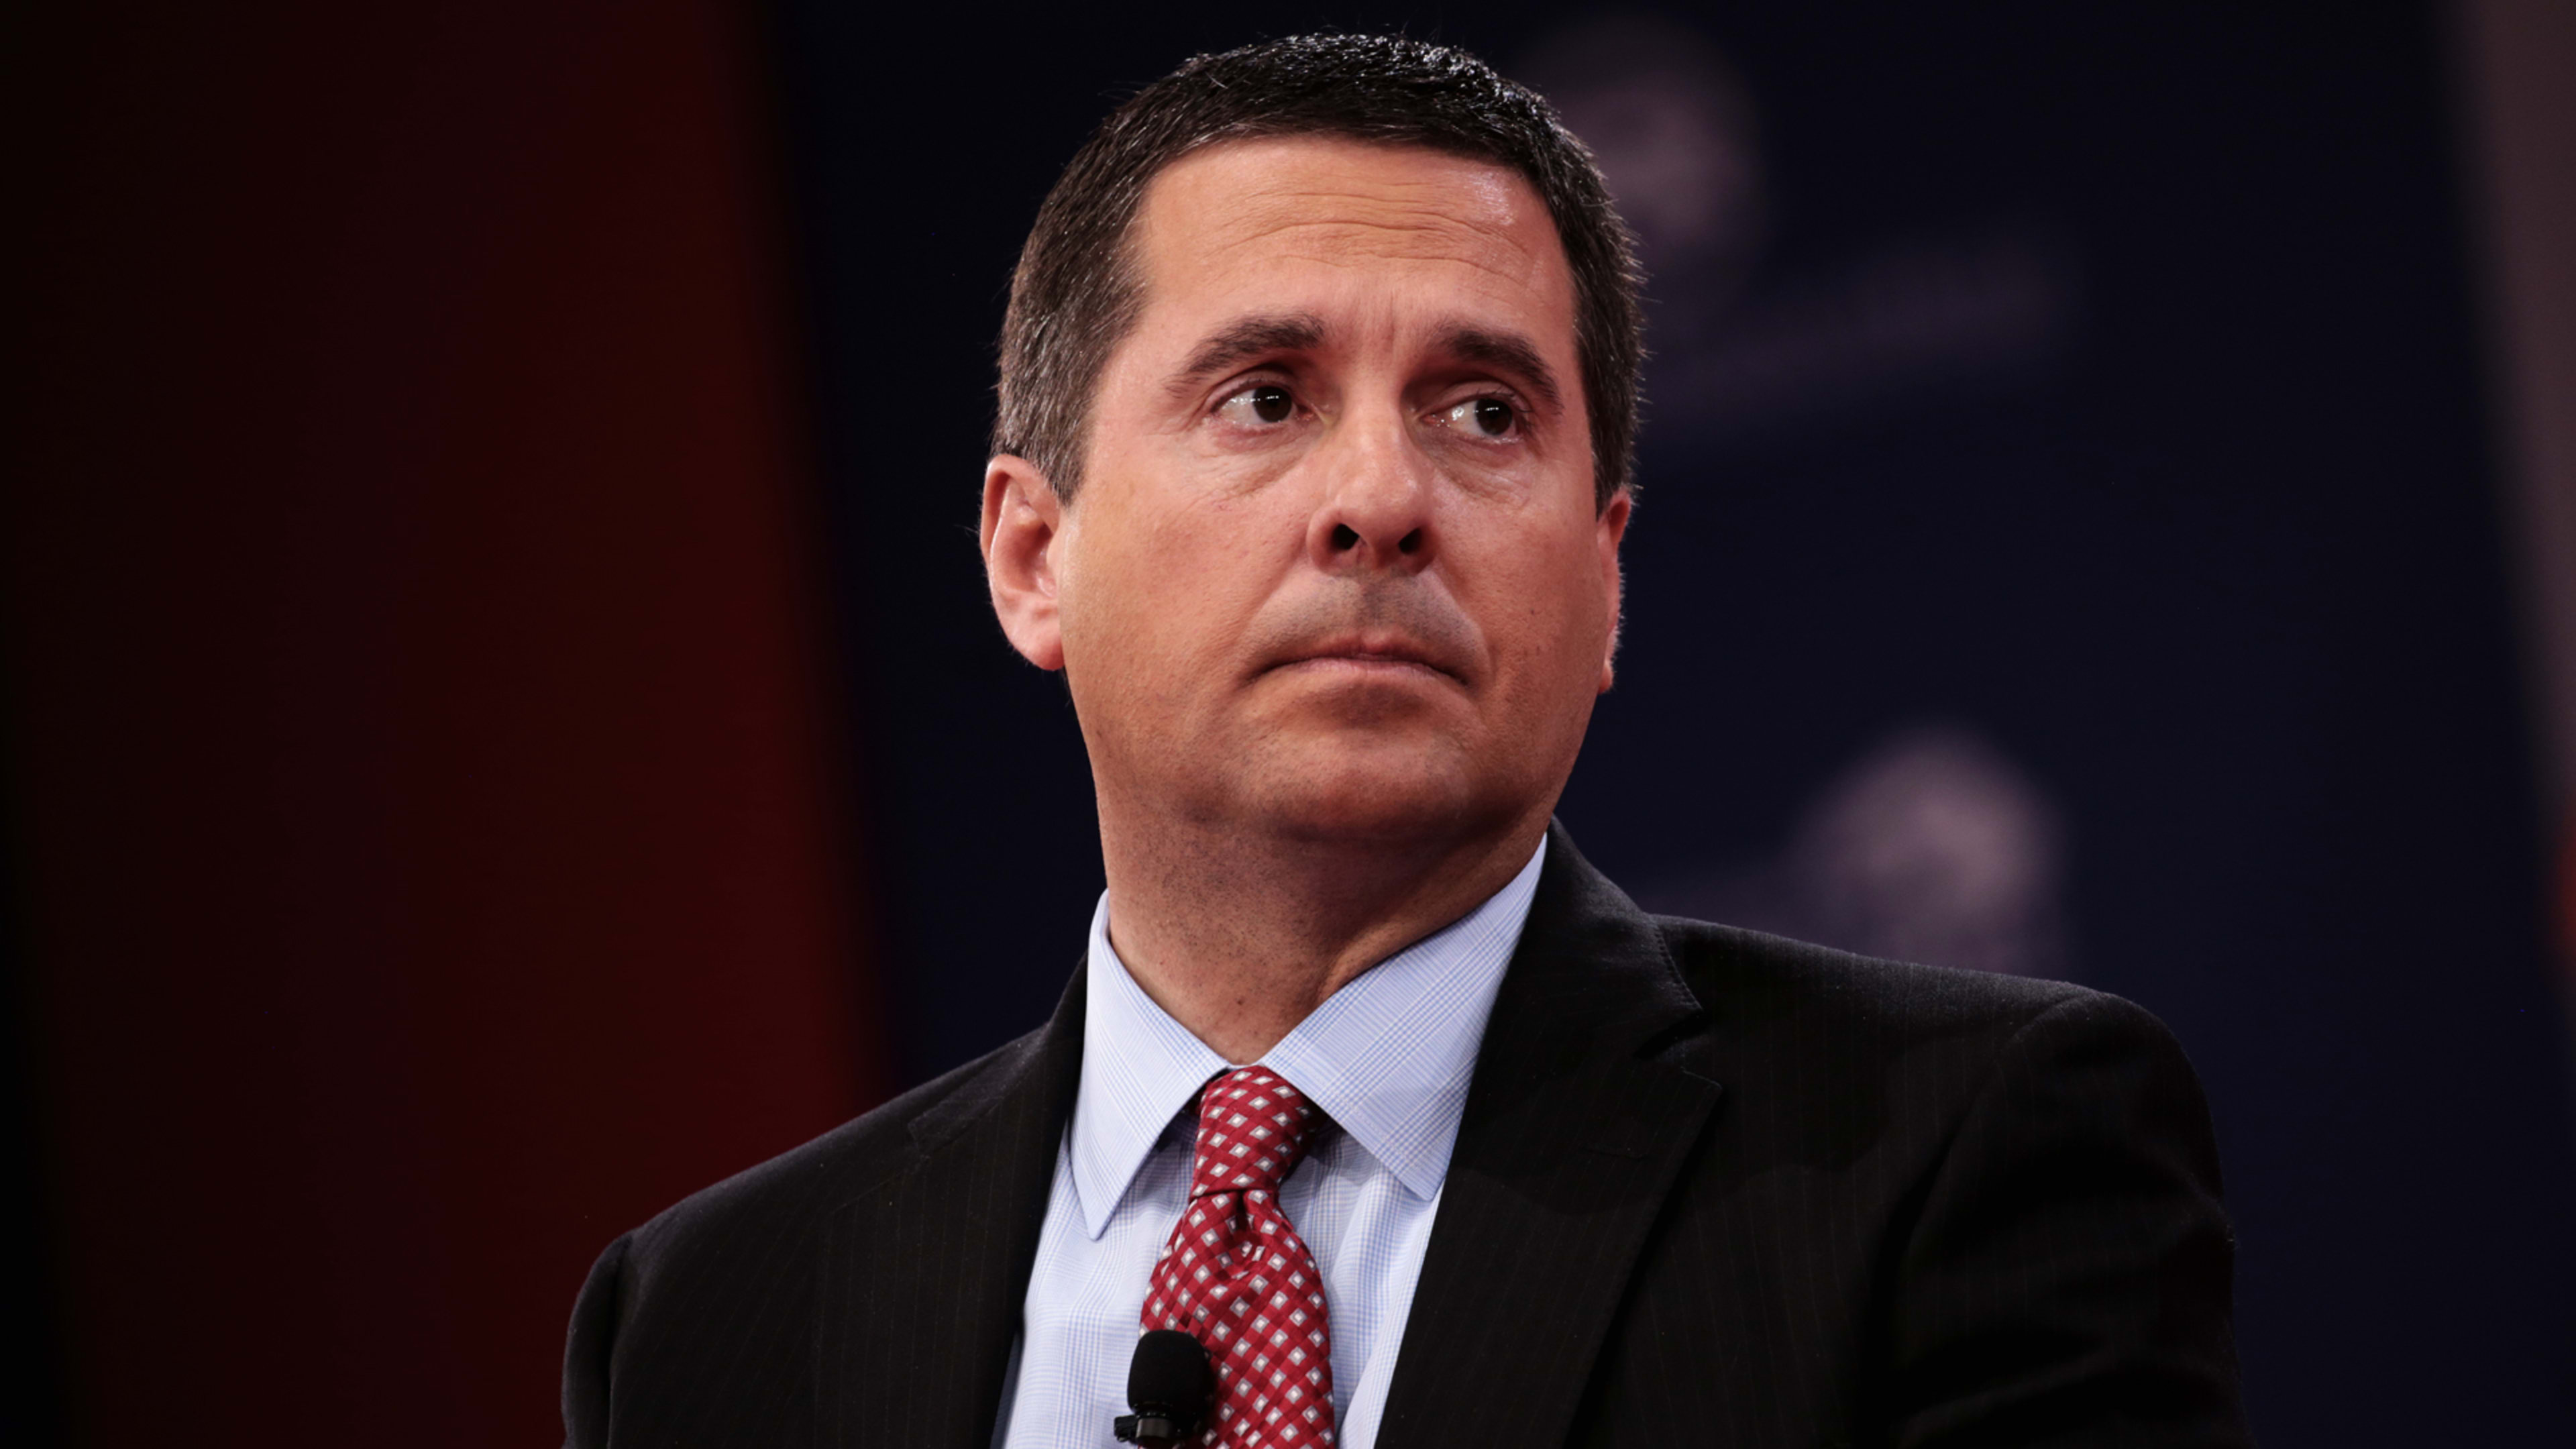 Devin Nunes sues Twitter, perfectly illustrates the Streisand effect